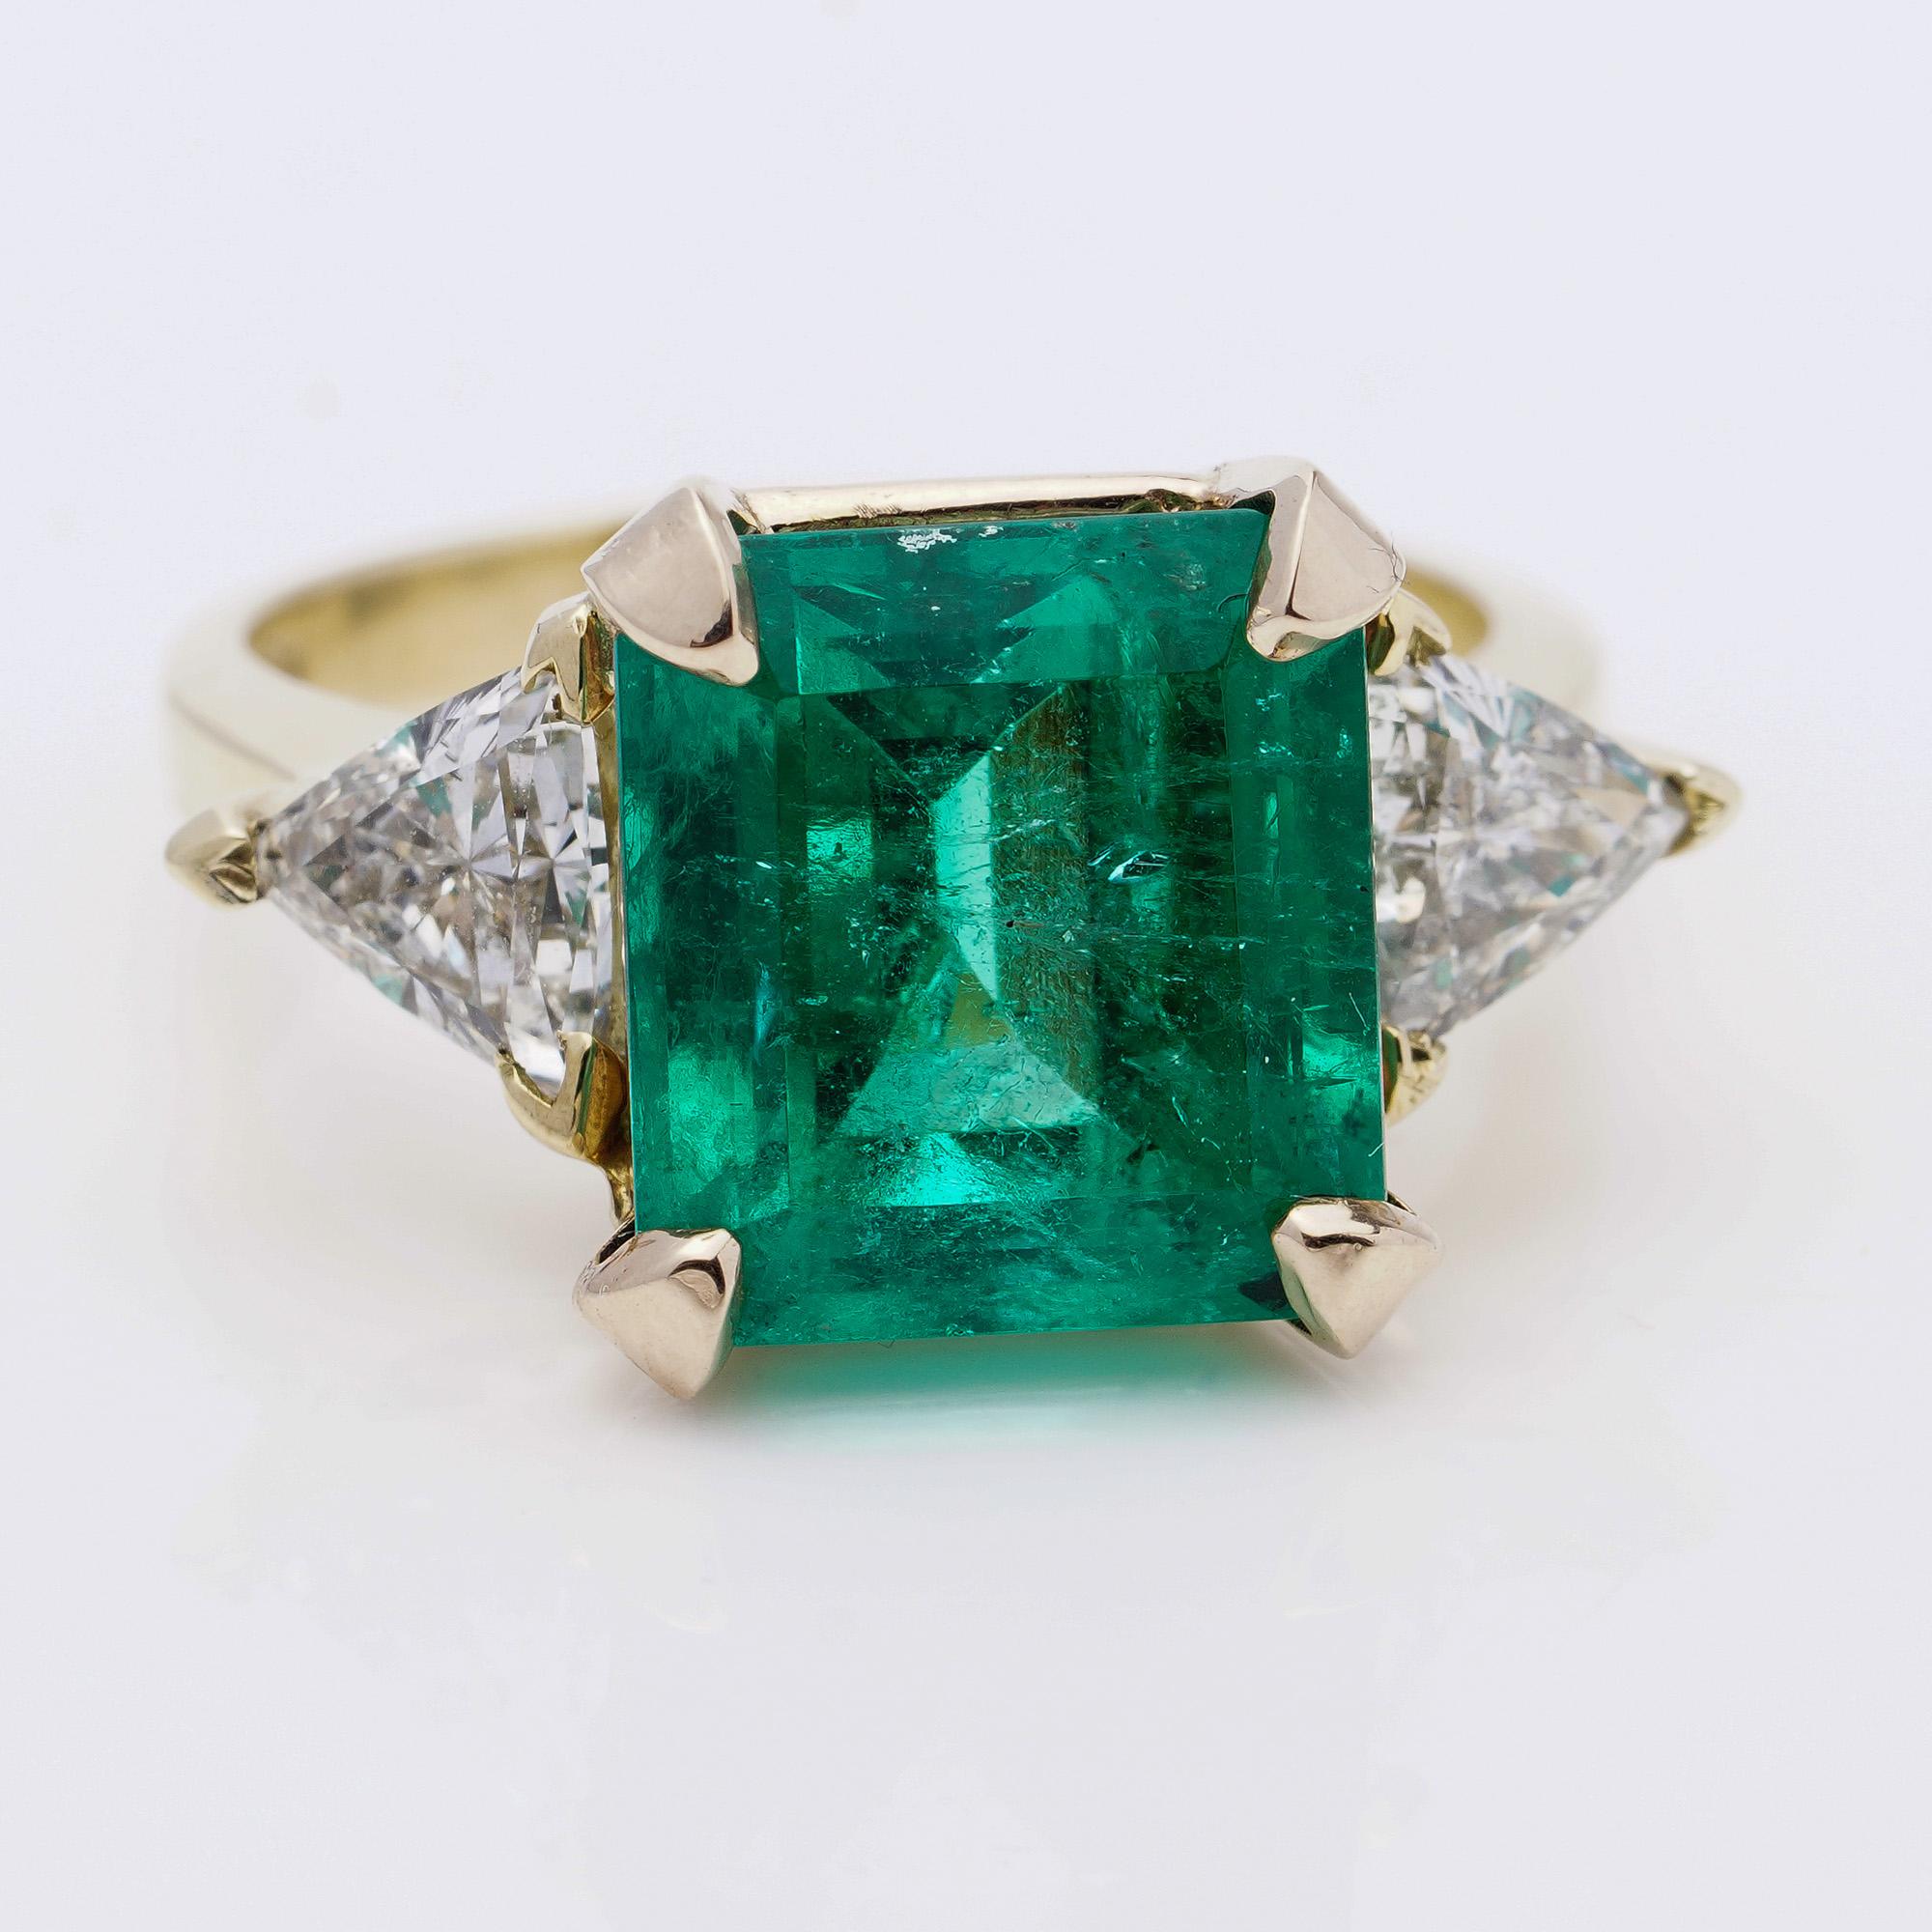 Octagon Cut GIA Certified 6.15 Carat Colombian Emerald Ring For Sale